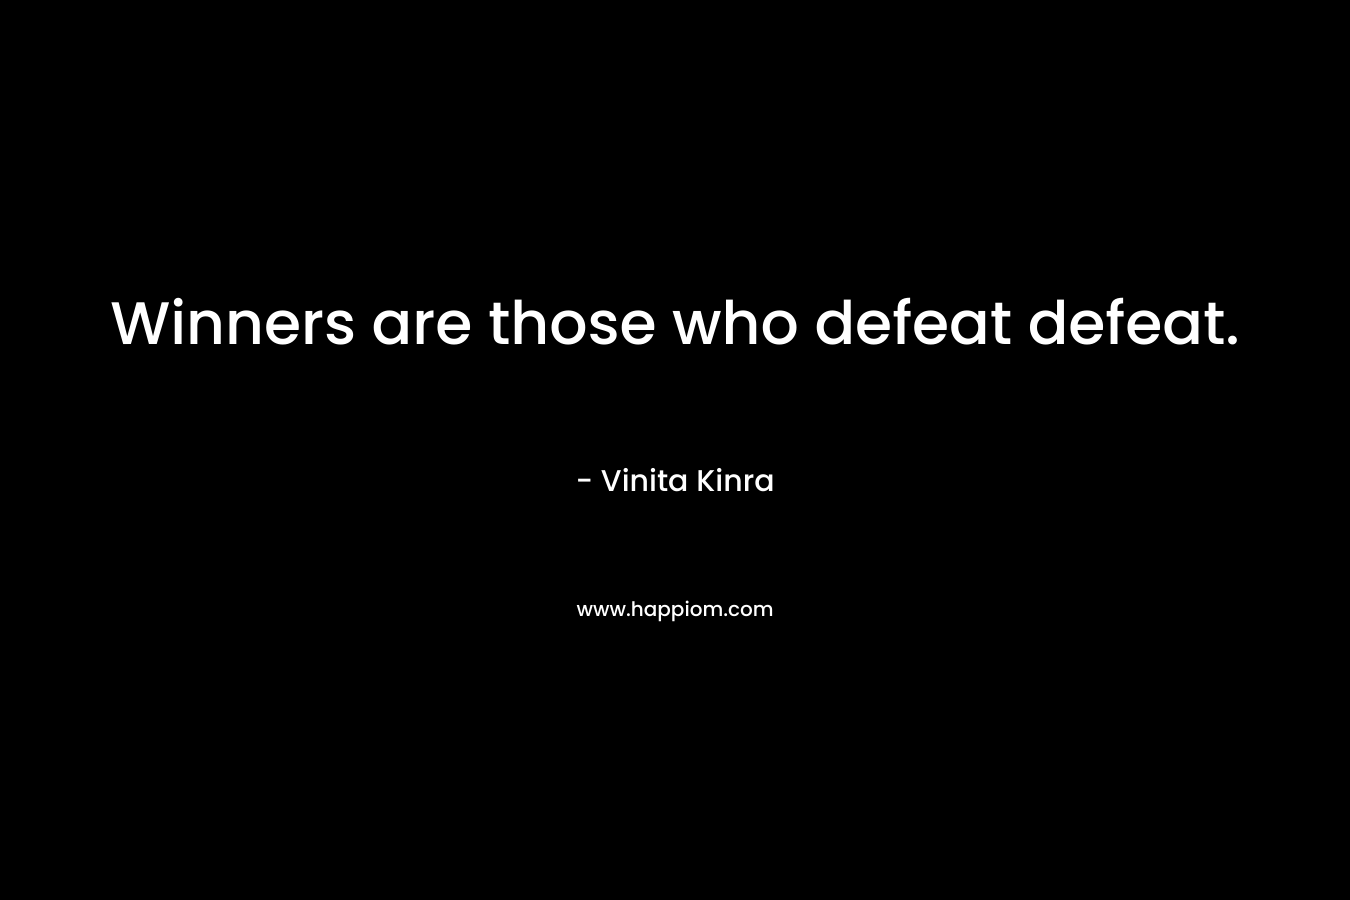 Winners are those who defeat defeat.